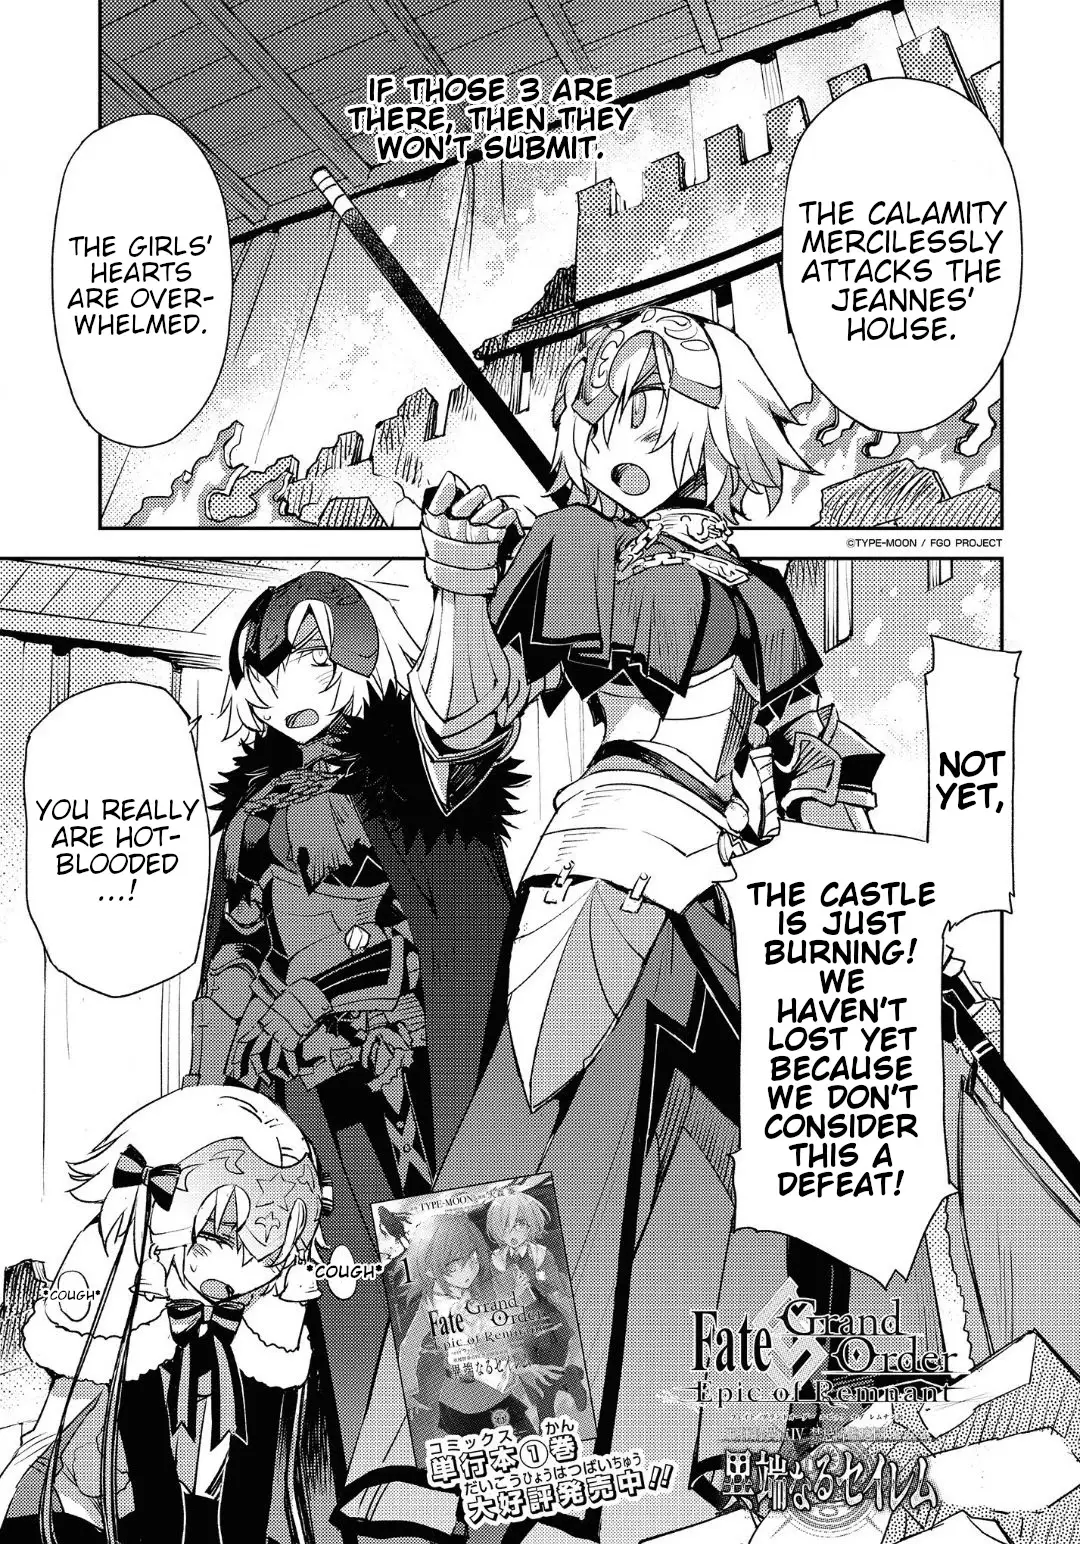 Fate/grand Order: Epic Of Remnant - Subspecies Singularity Iv: Taboo Advent Salem: Salem Of Heresy - 14 page 2